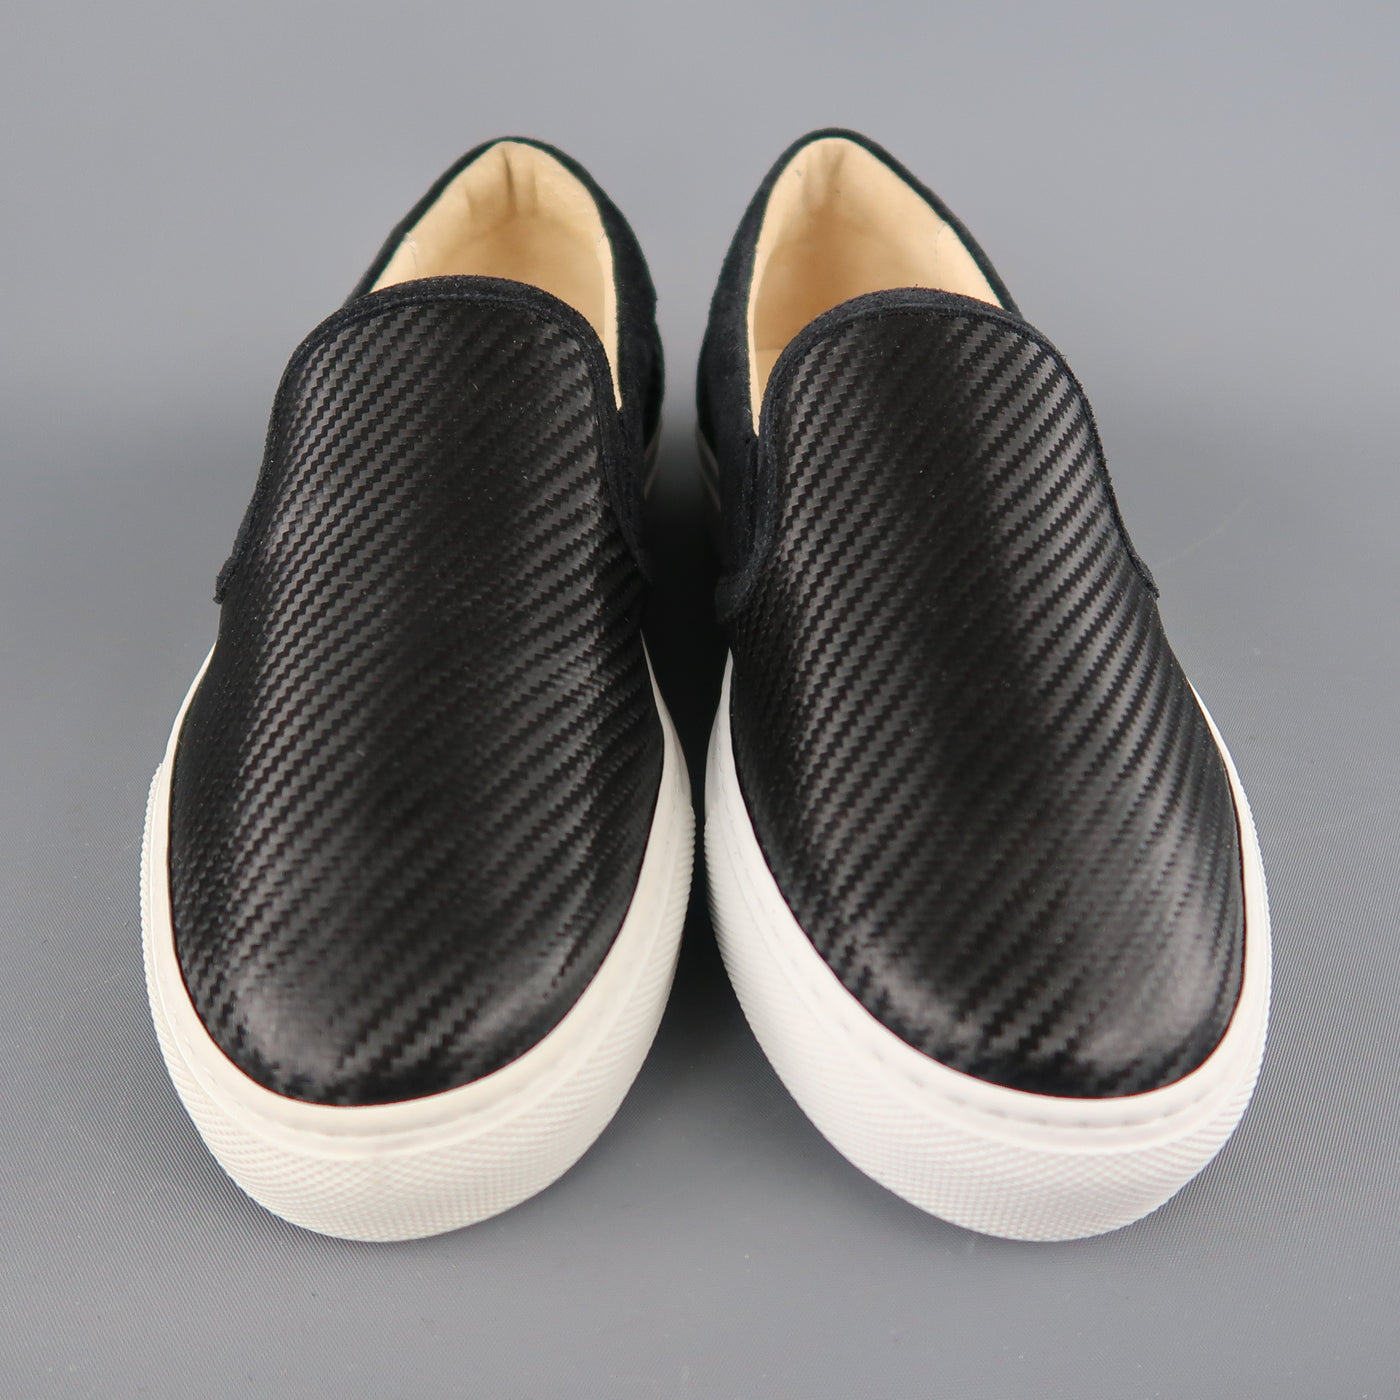 BARNEY'S NEW YORK Size 6 Black Textured Rubber & Suede Slip On Sneakers